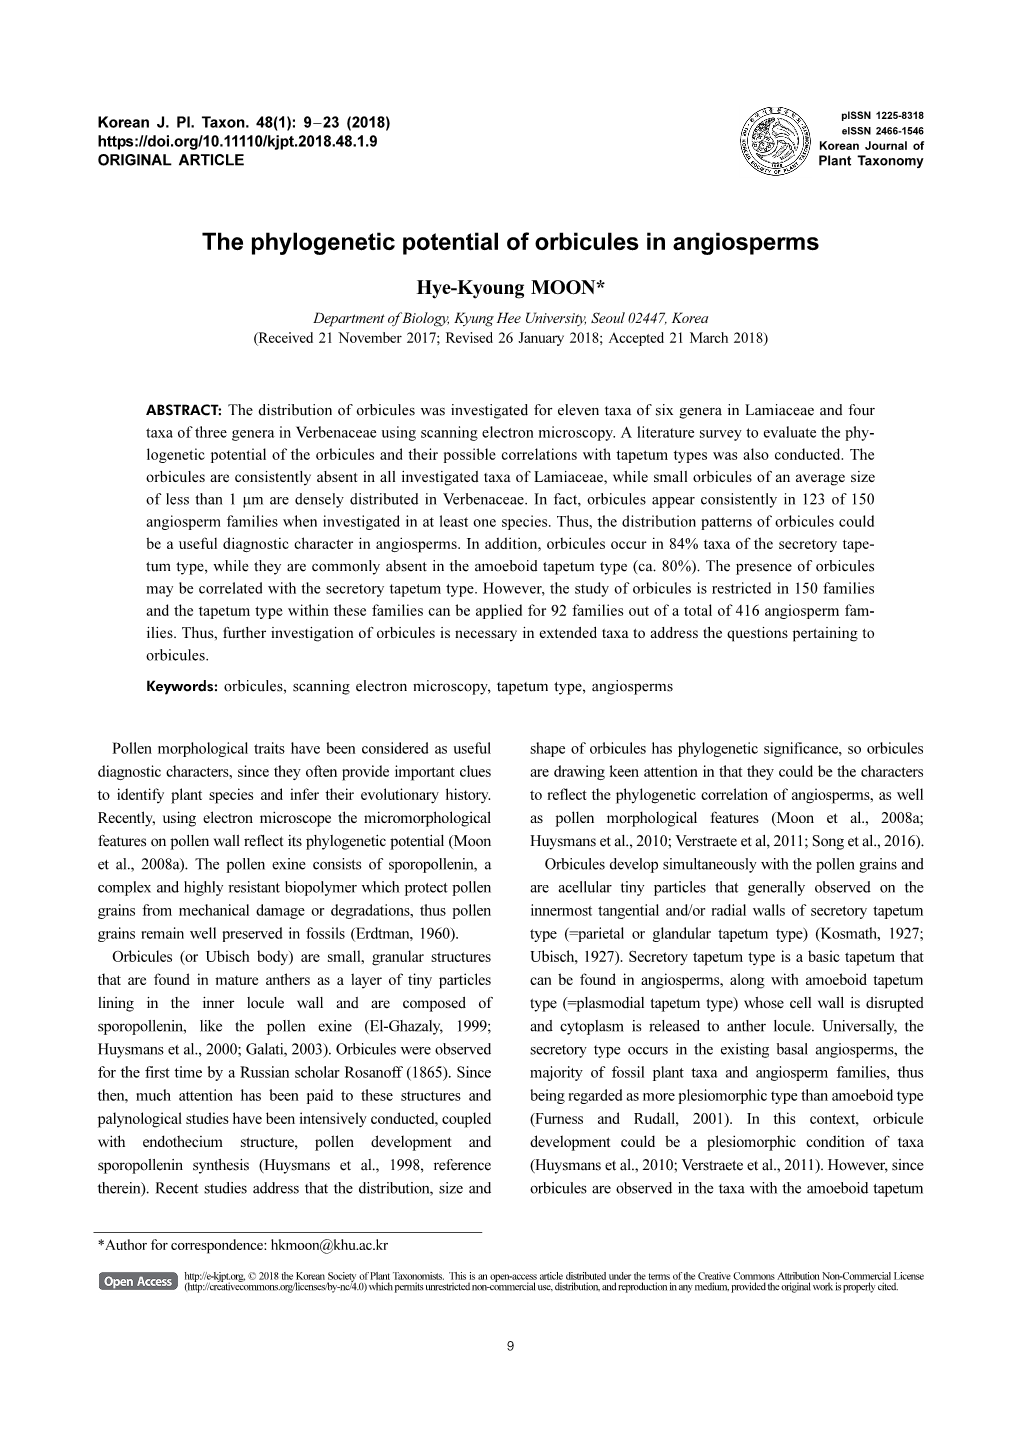 The Phylogenetic Potential of Orbicules in Angiosperms